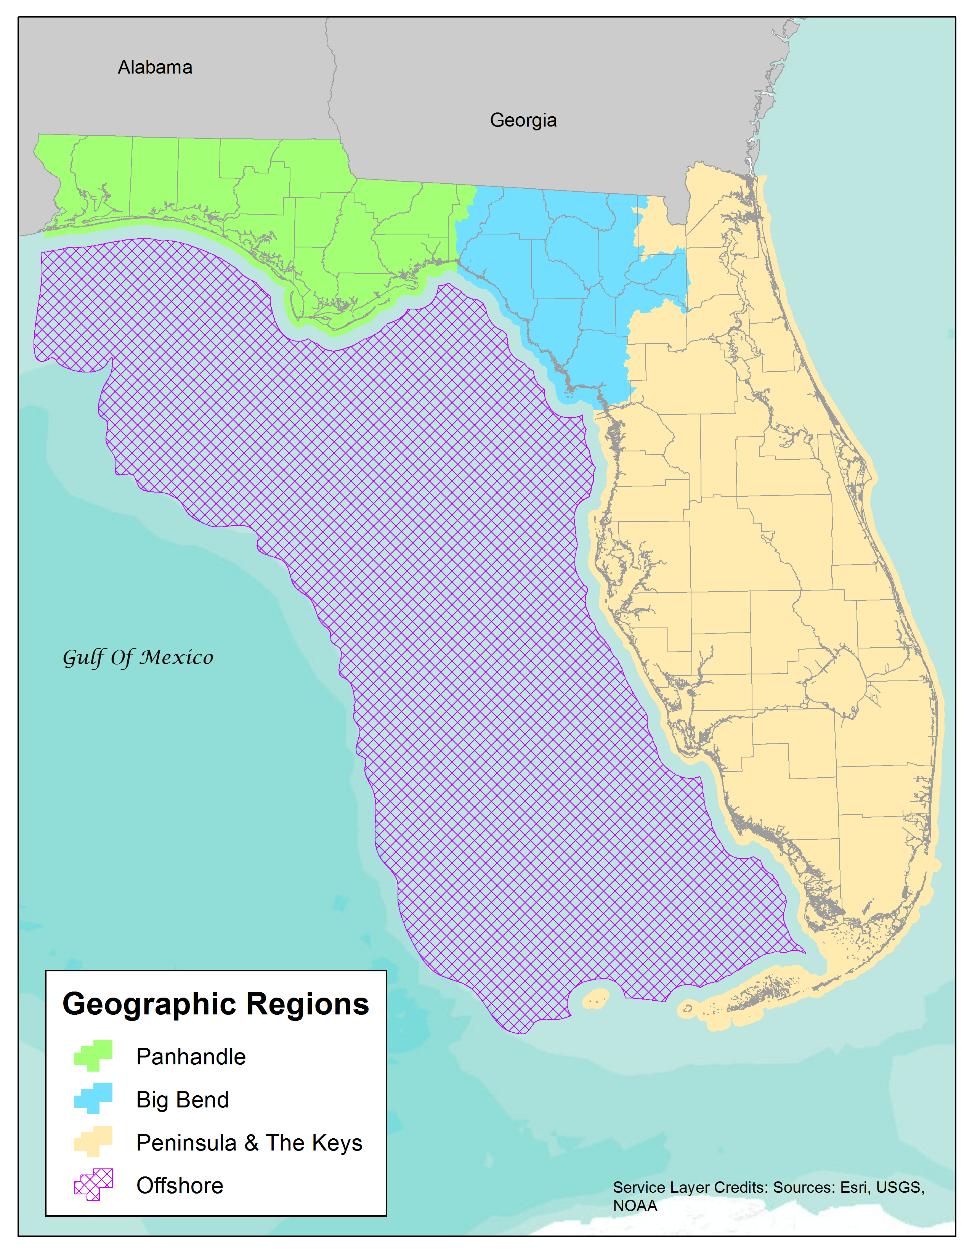 GEBF in Florida Majority of GEBF projects will be concentrated in Panhandle and Big